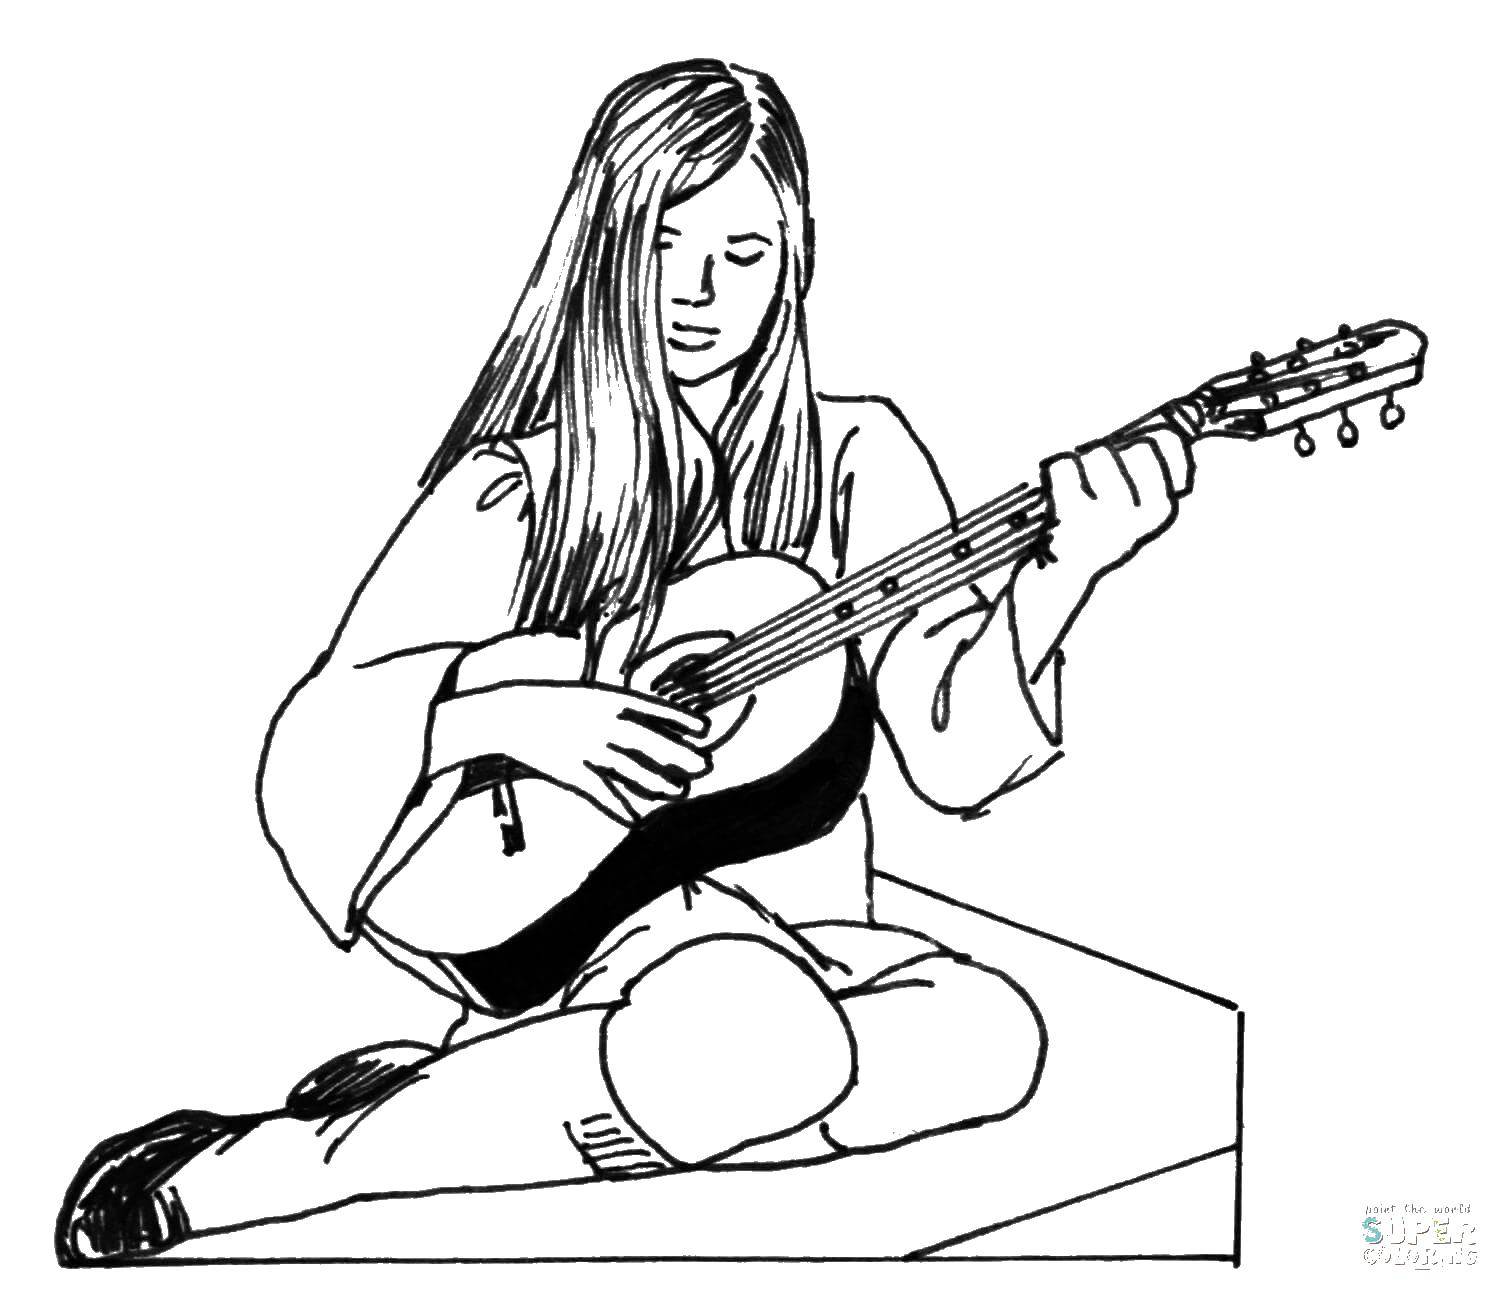 Coloring Girl playing the guitar. Category guitar . Tags:  guitar, music, girl.